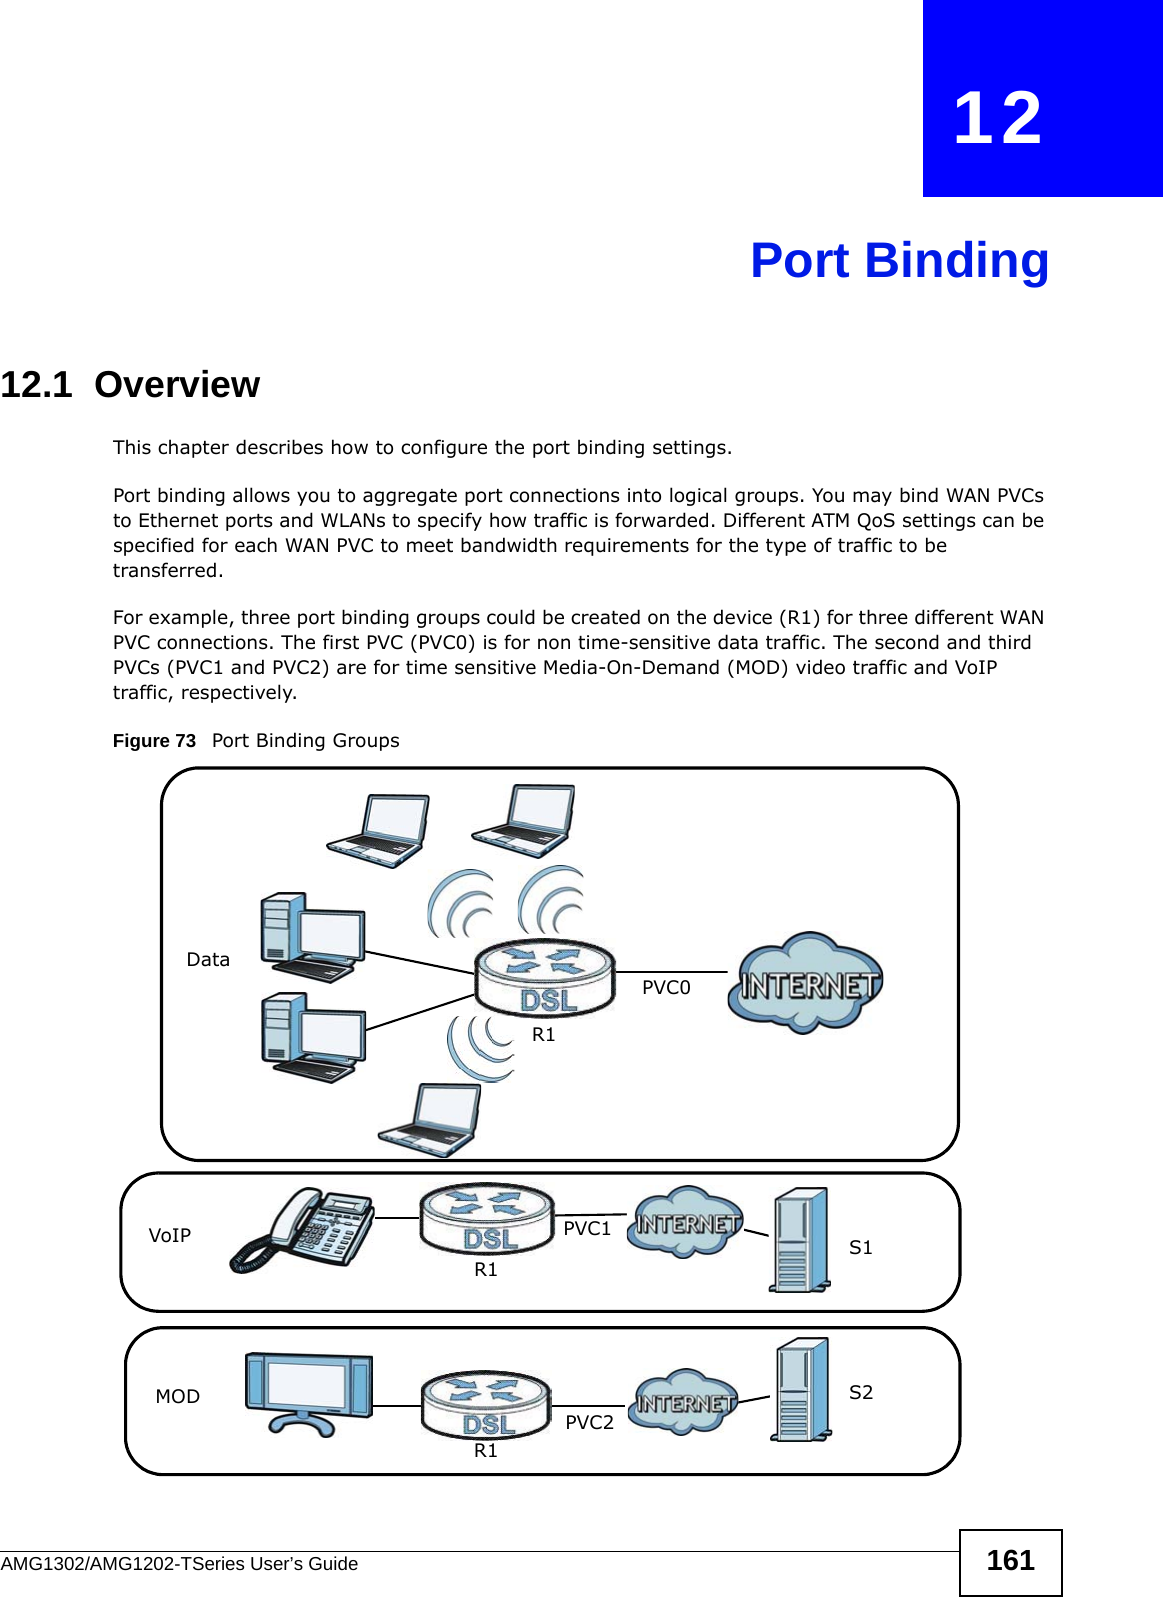 AMG1302/AMG1202-TSeries User’s Guide 161CHAPTER   12Port Binding12.1  OverviewThis chapter describes how to configure the port binding settings.Port binding allows you to aggregate port connections into logical groups. You may bind WAN PVCs to Ethernet ports and WLANs to specify how traffic is forwarded. Different ATM QoS settings can be specified for each WAN PVC to meet bandwidth requirements for the type of traffic to be transferred.For example, three port binding groups could be created on the device (R1) for three different WAN PVC connections. The first PVC (PVC0) is for non time-sensitive data traffic. The second and third PVCs (PVC1 and PVC2) are for time sensitive Media-On-Demand (MOD) video traffic and VoIP traffic, respectively.   Figure 73   Port Binding GroupsS2S1R1R1R1MODVoIPDataPVC0PVC2PVC1